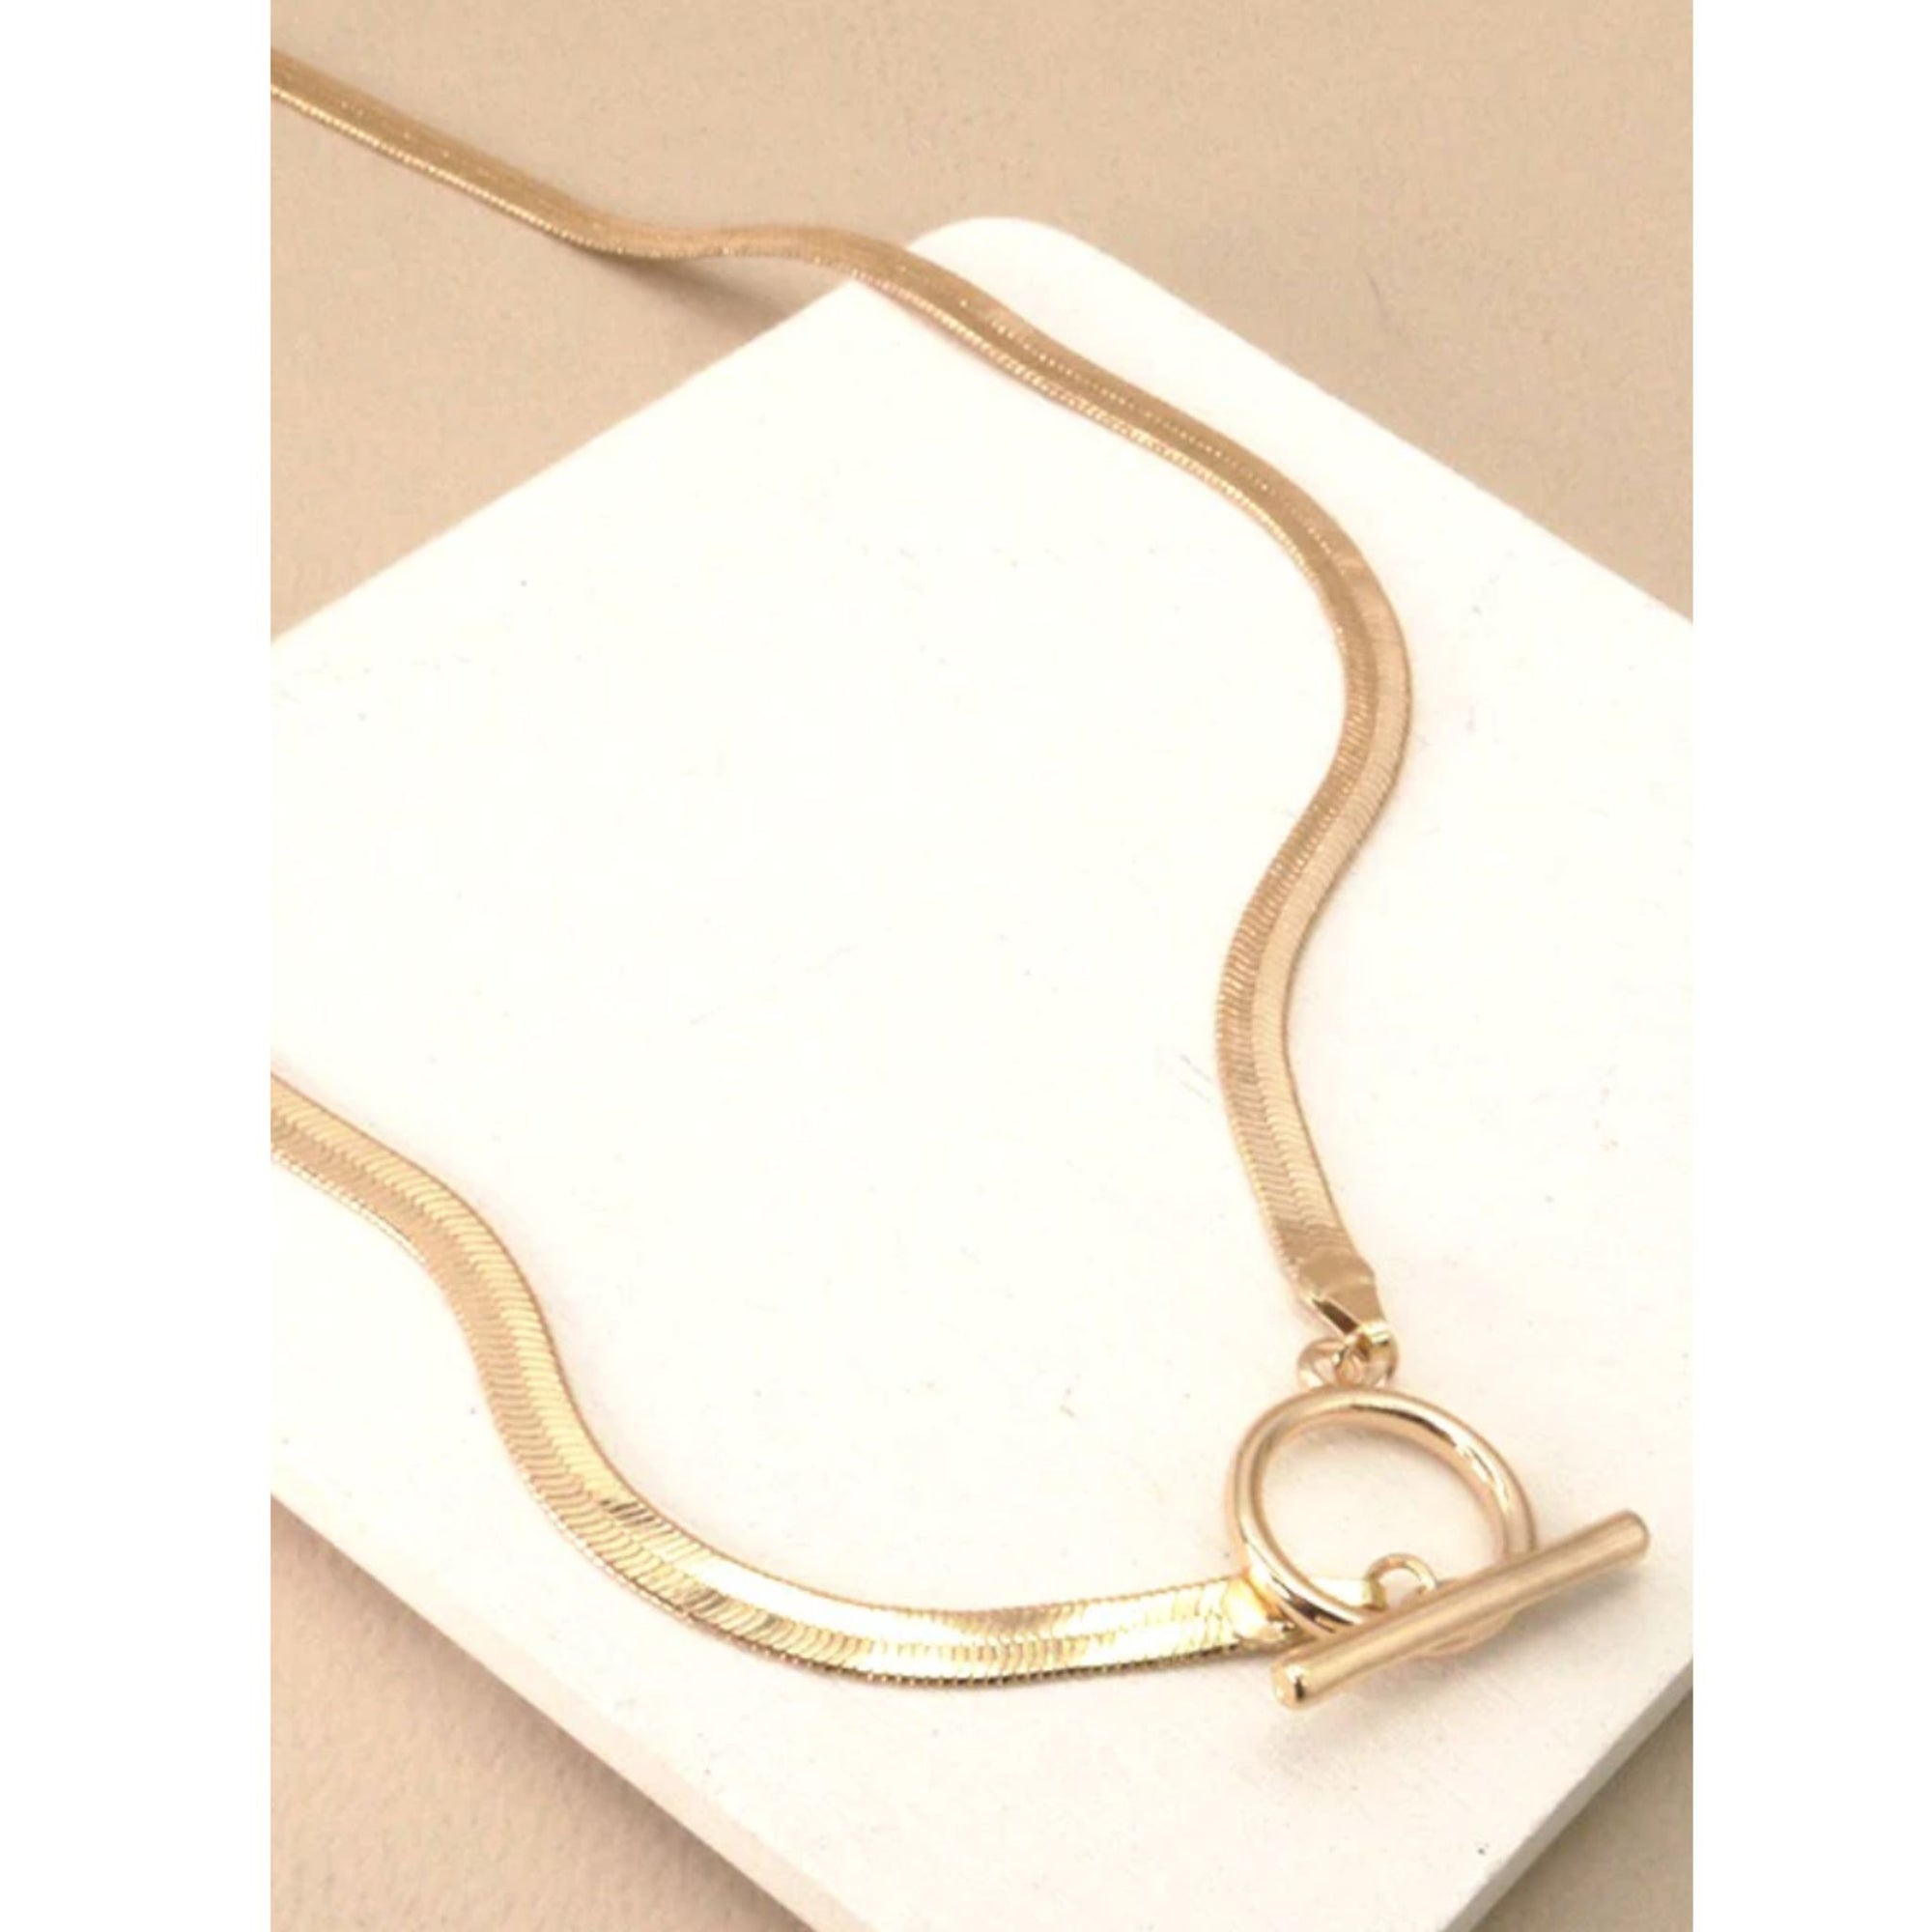 Snake Chain Necklace with Toggle Closure